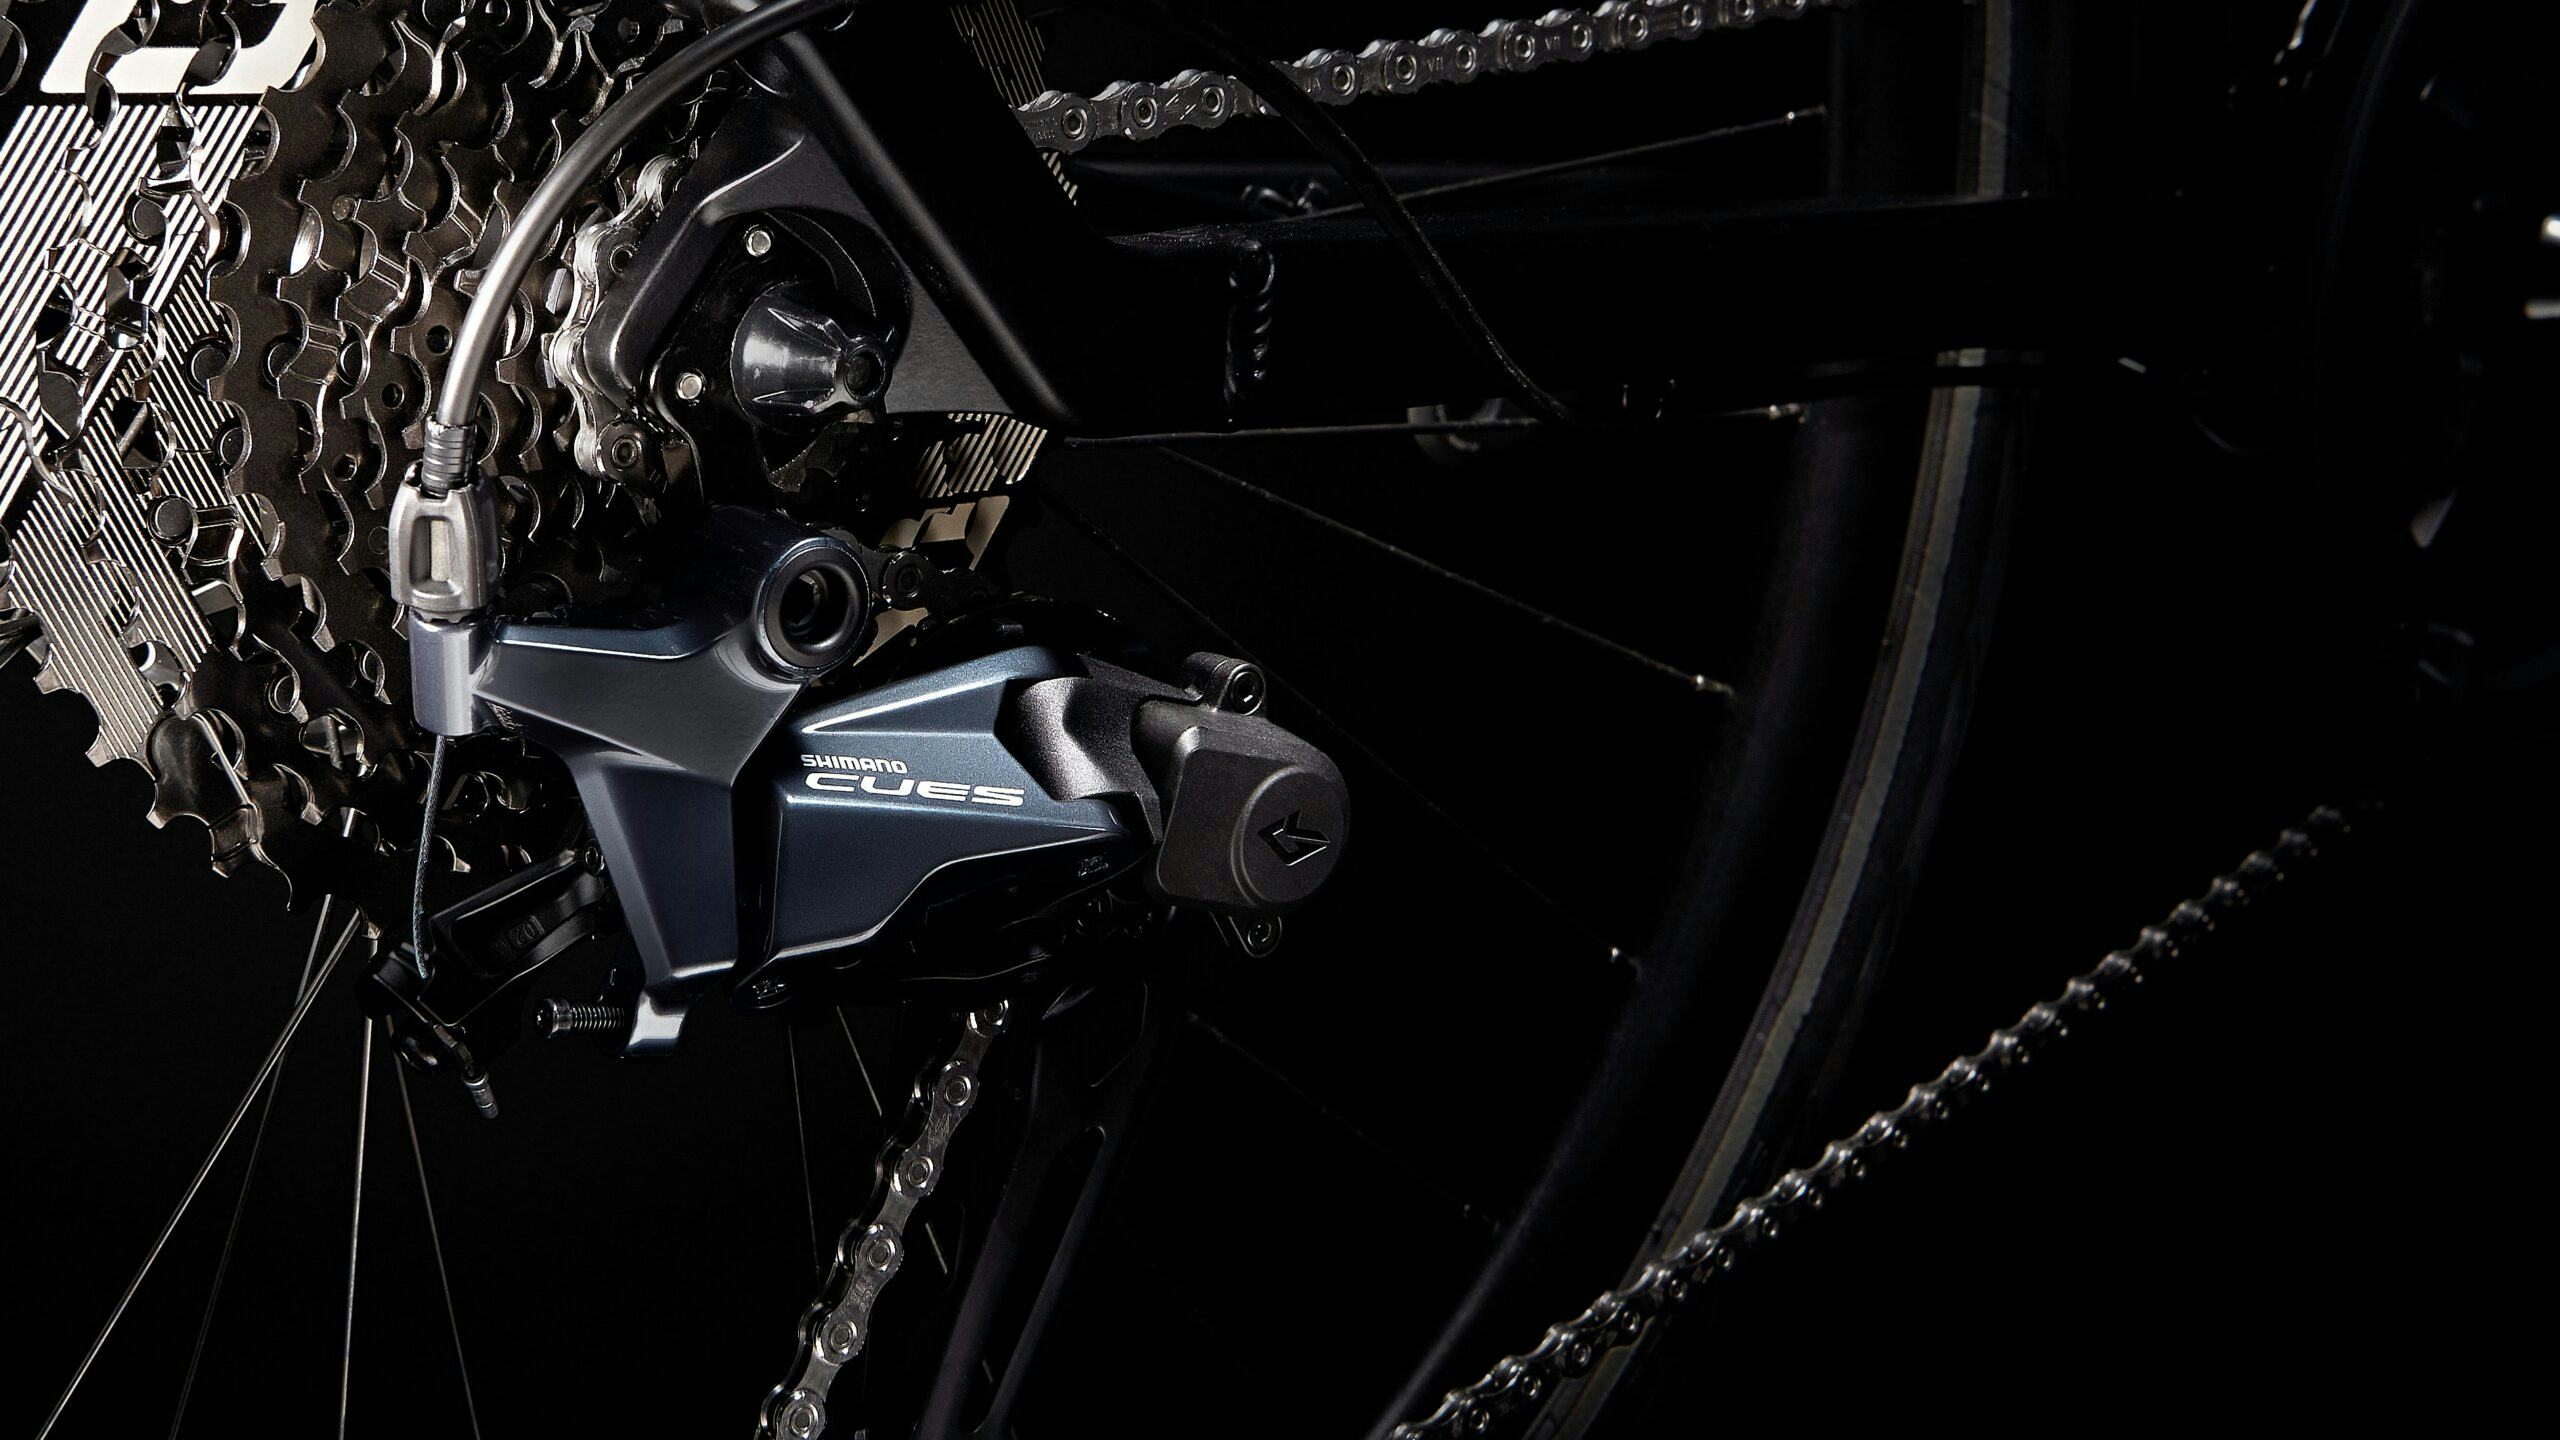 According to Shimano the interest in bicycles continues to be high in Europe. – Photo Shimano